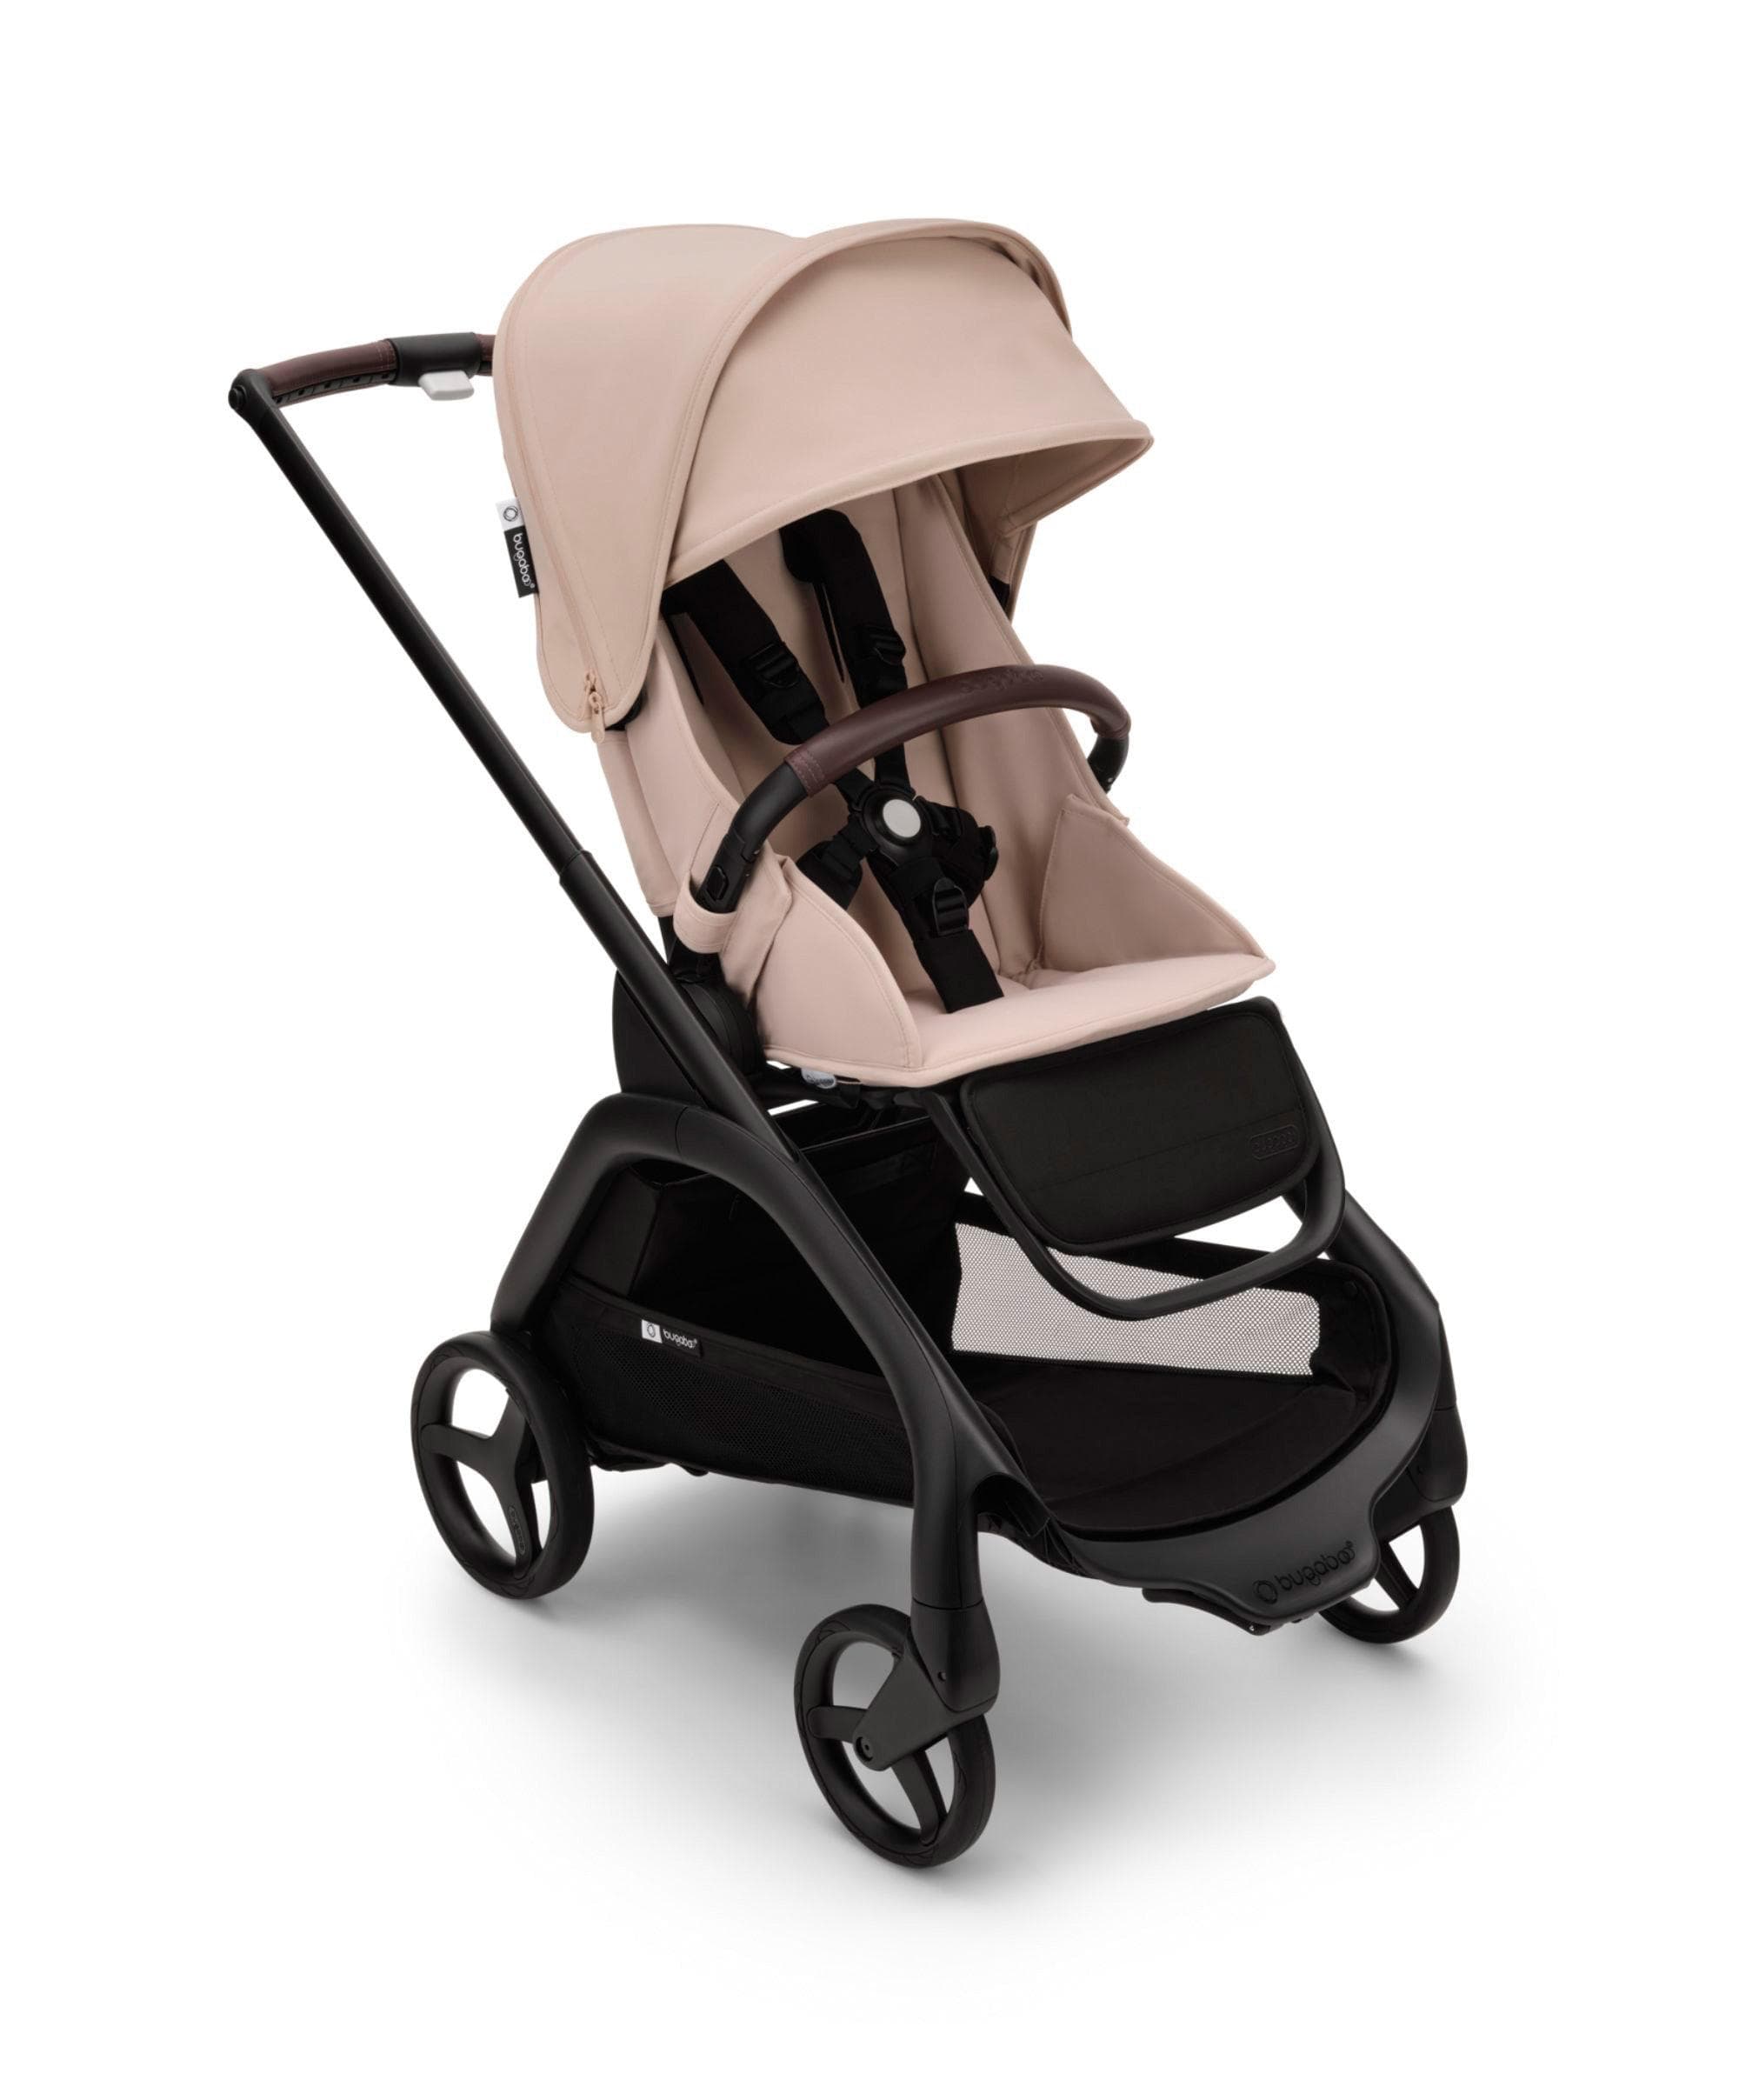 Bugaboo Dragonfly Pushchair - Taupe